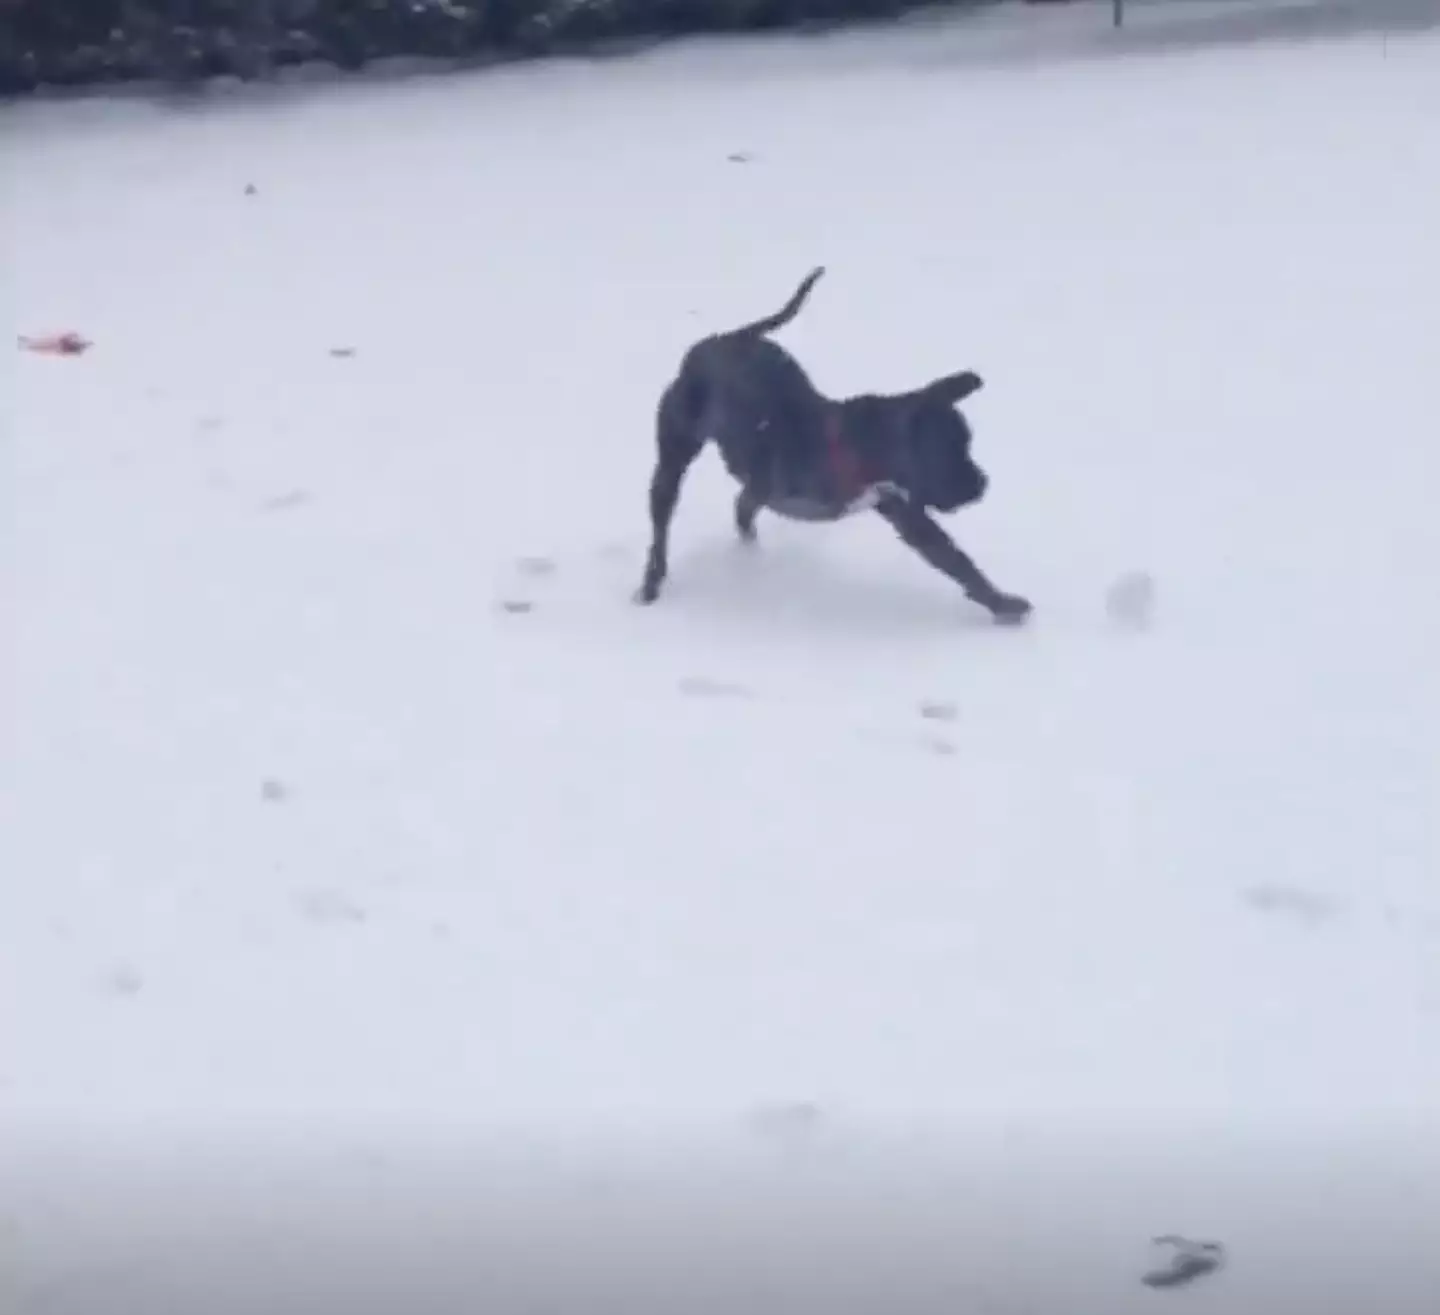 The TV host shared an adorable video of Dipper playing in the snow.